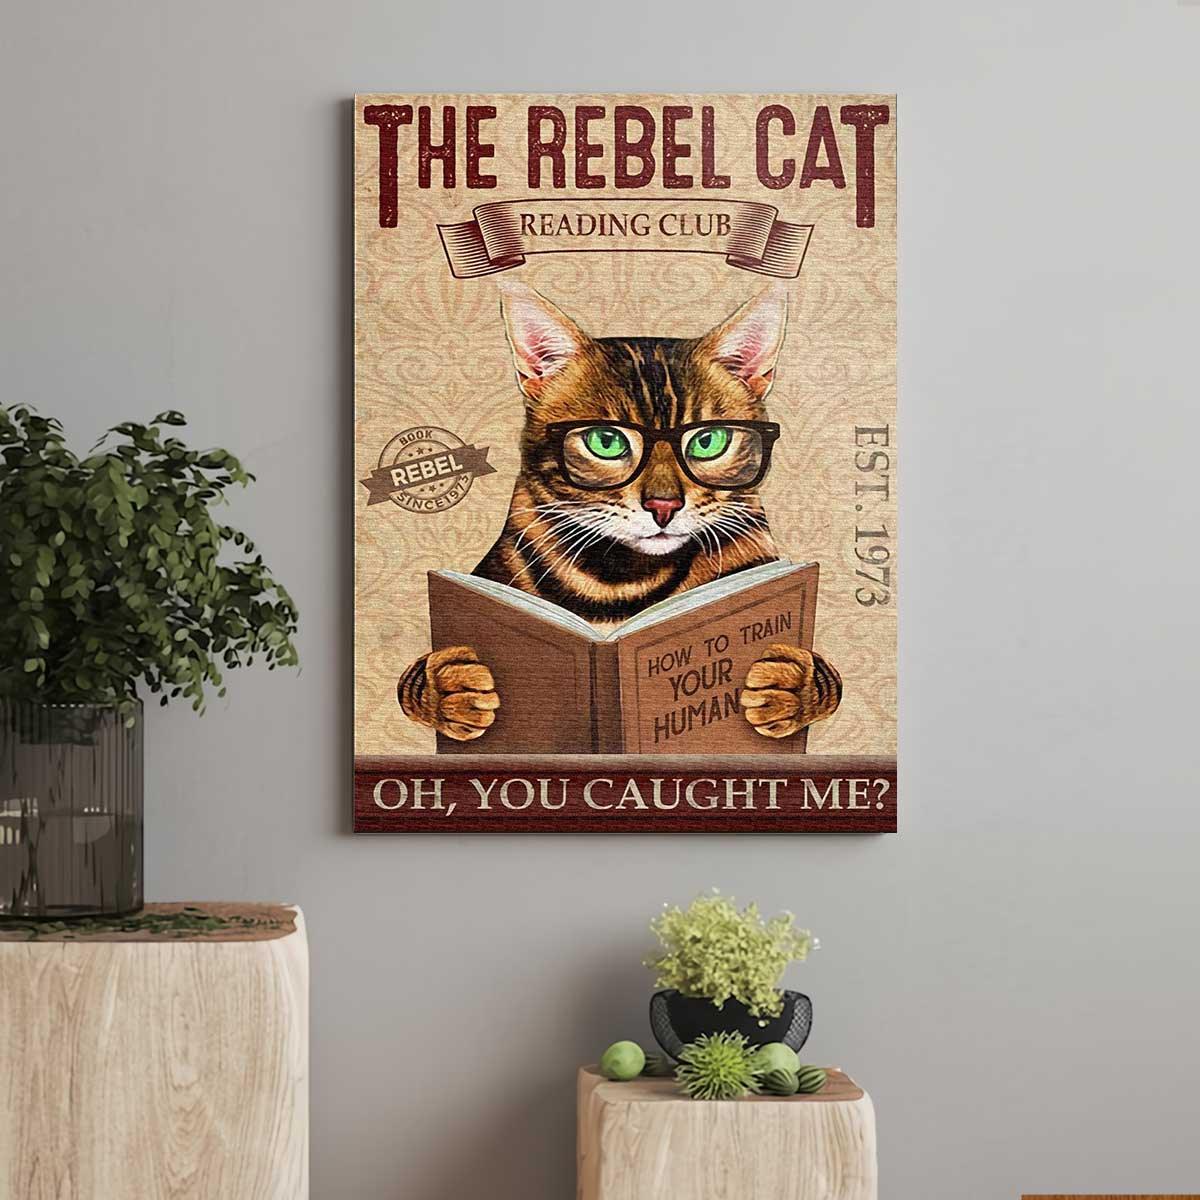 Bengal Cat Portrait Canvas, The Rebel Cat Reading Club You Caught Me Portrait Canvas, Premium Wrapped Canvas - Perfect Gift For Bengal Cat Owner - Amzanimalsgift